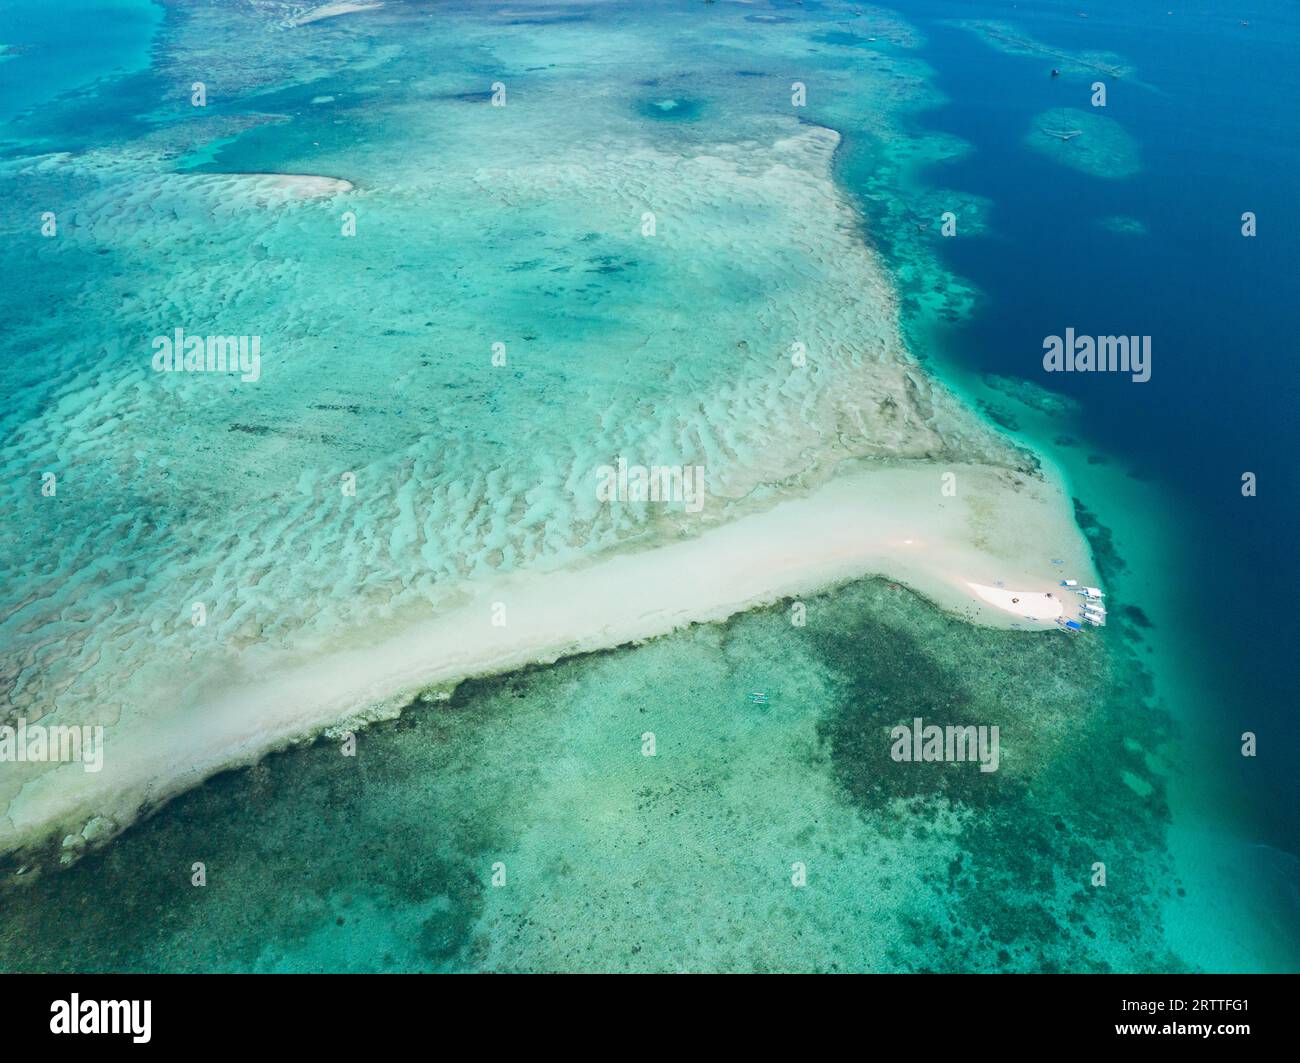 Vanishing Island and turquoise water with coral reefs. Barobo, Surigao del Sur. Philippines. Stock Photo